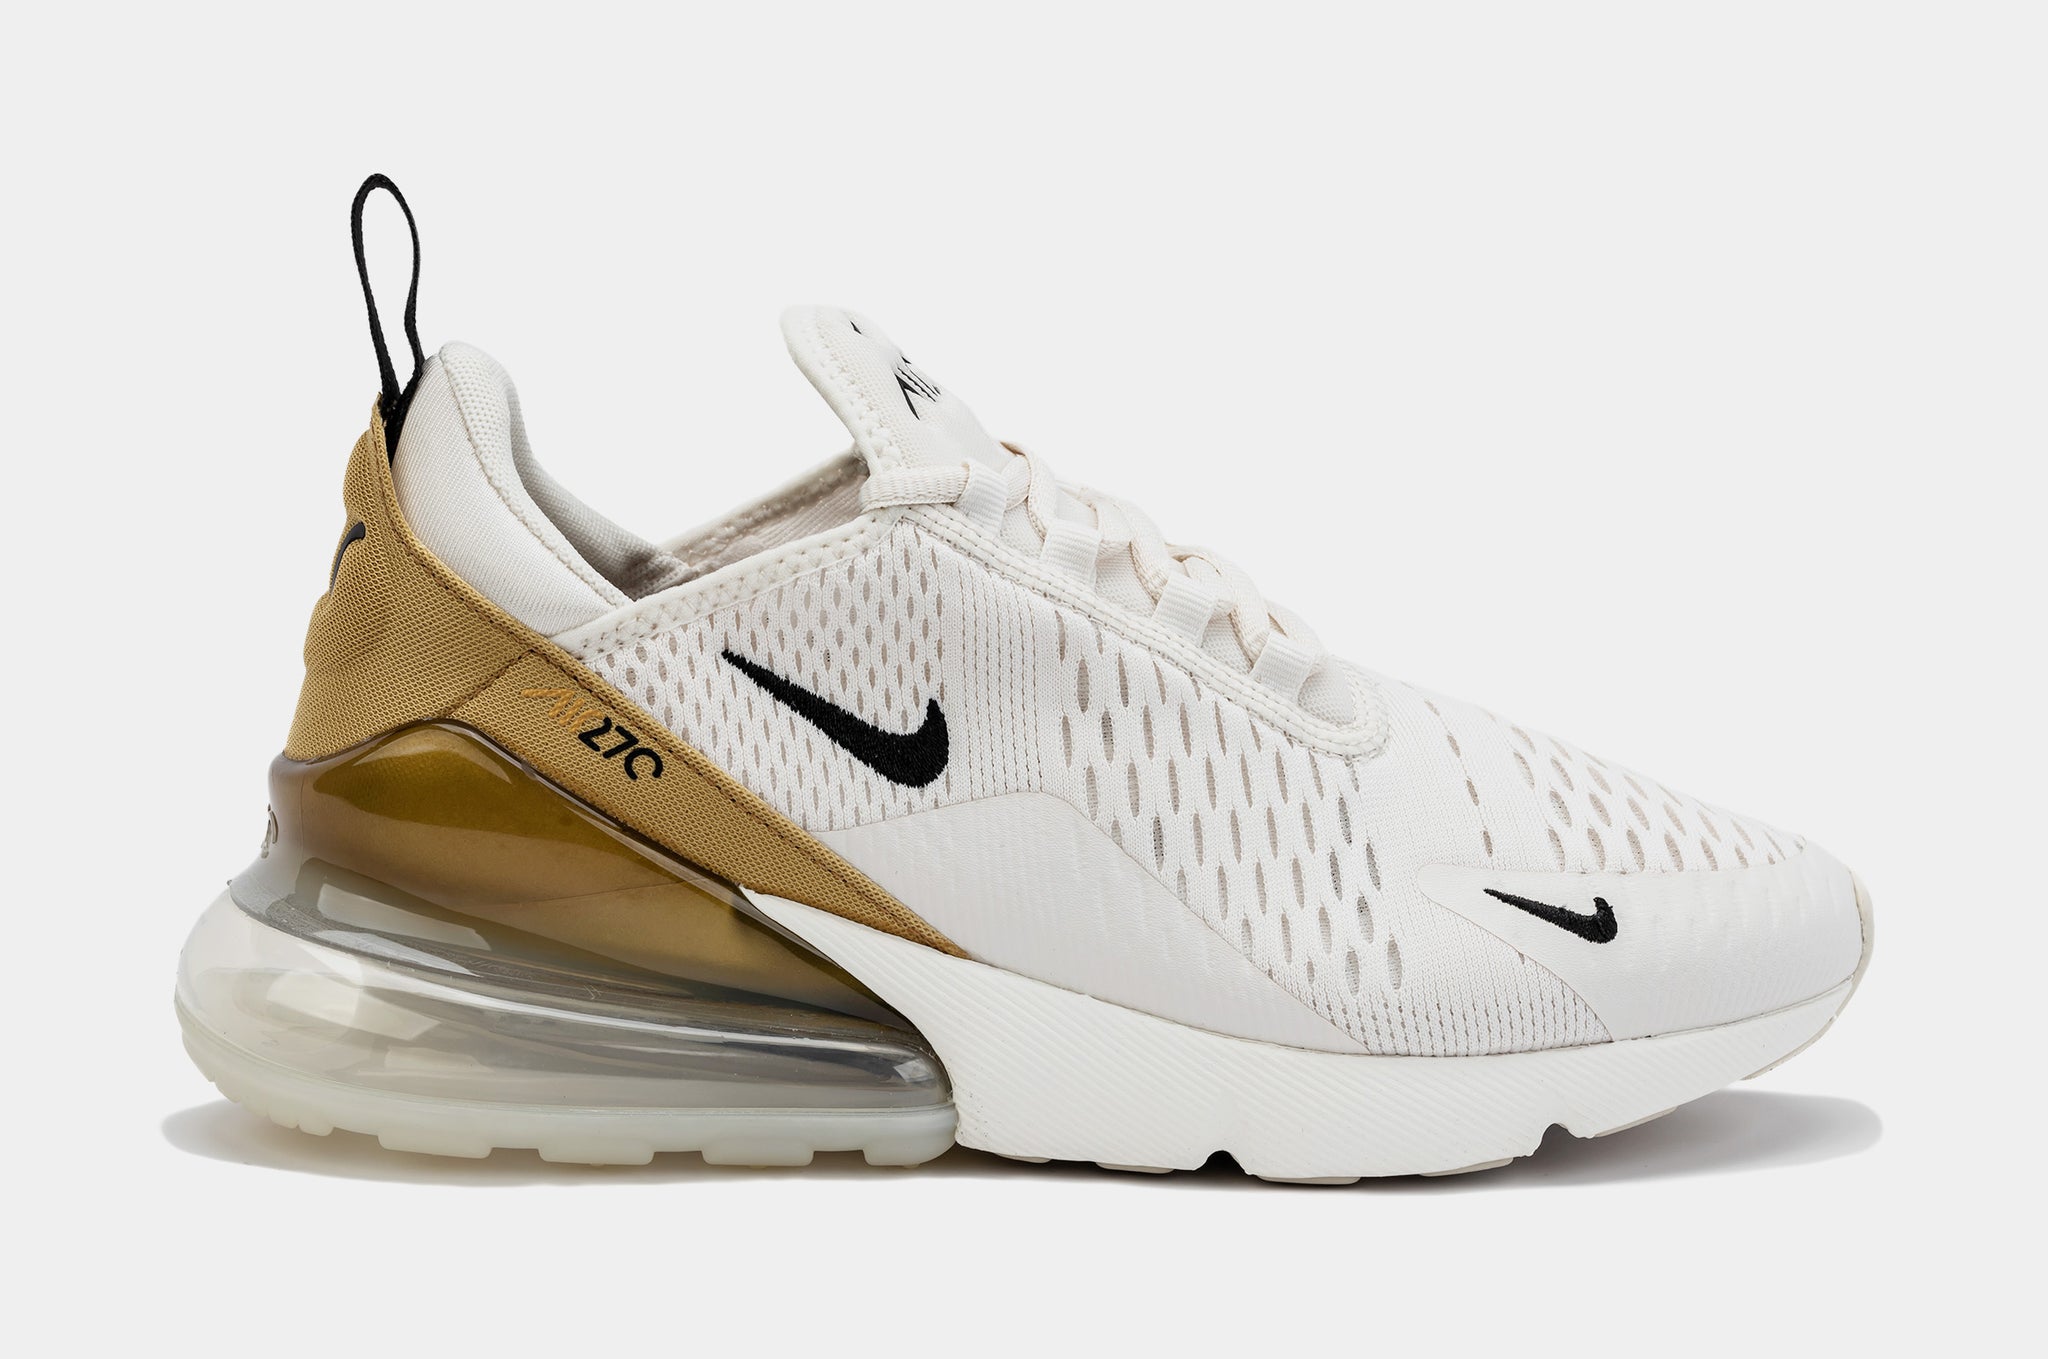 Nike Air Max 270 Womens Running Shoes Beige Gold DZ7736-001 – Shoe Palace